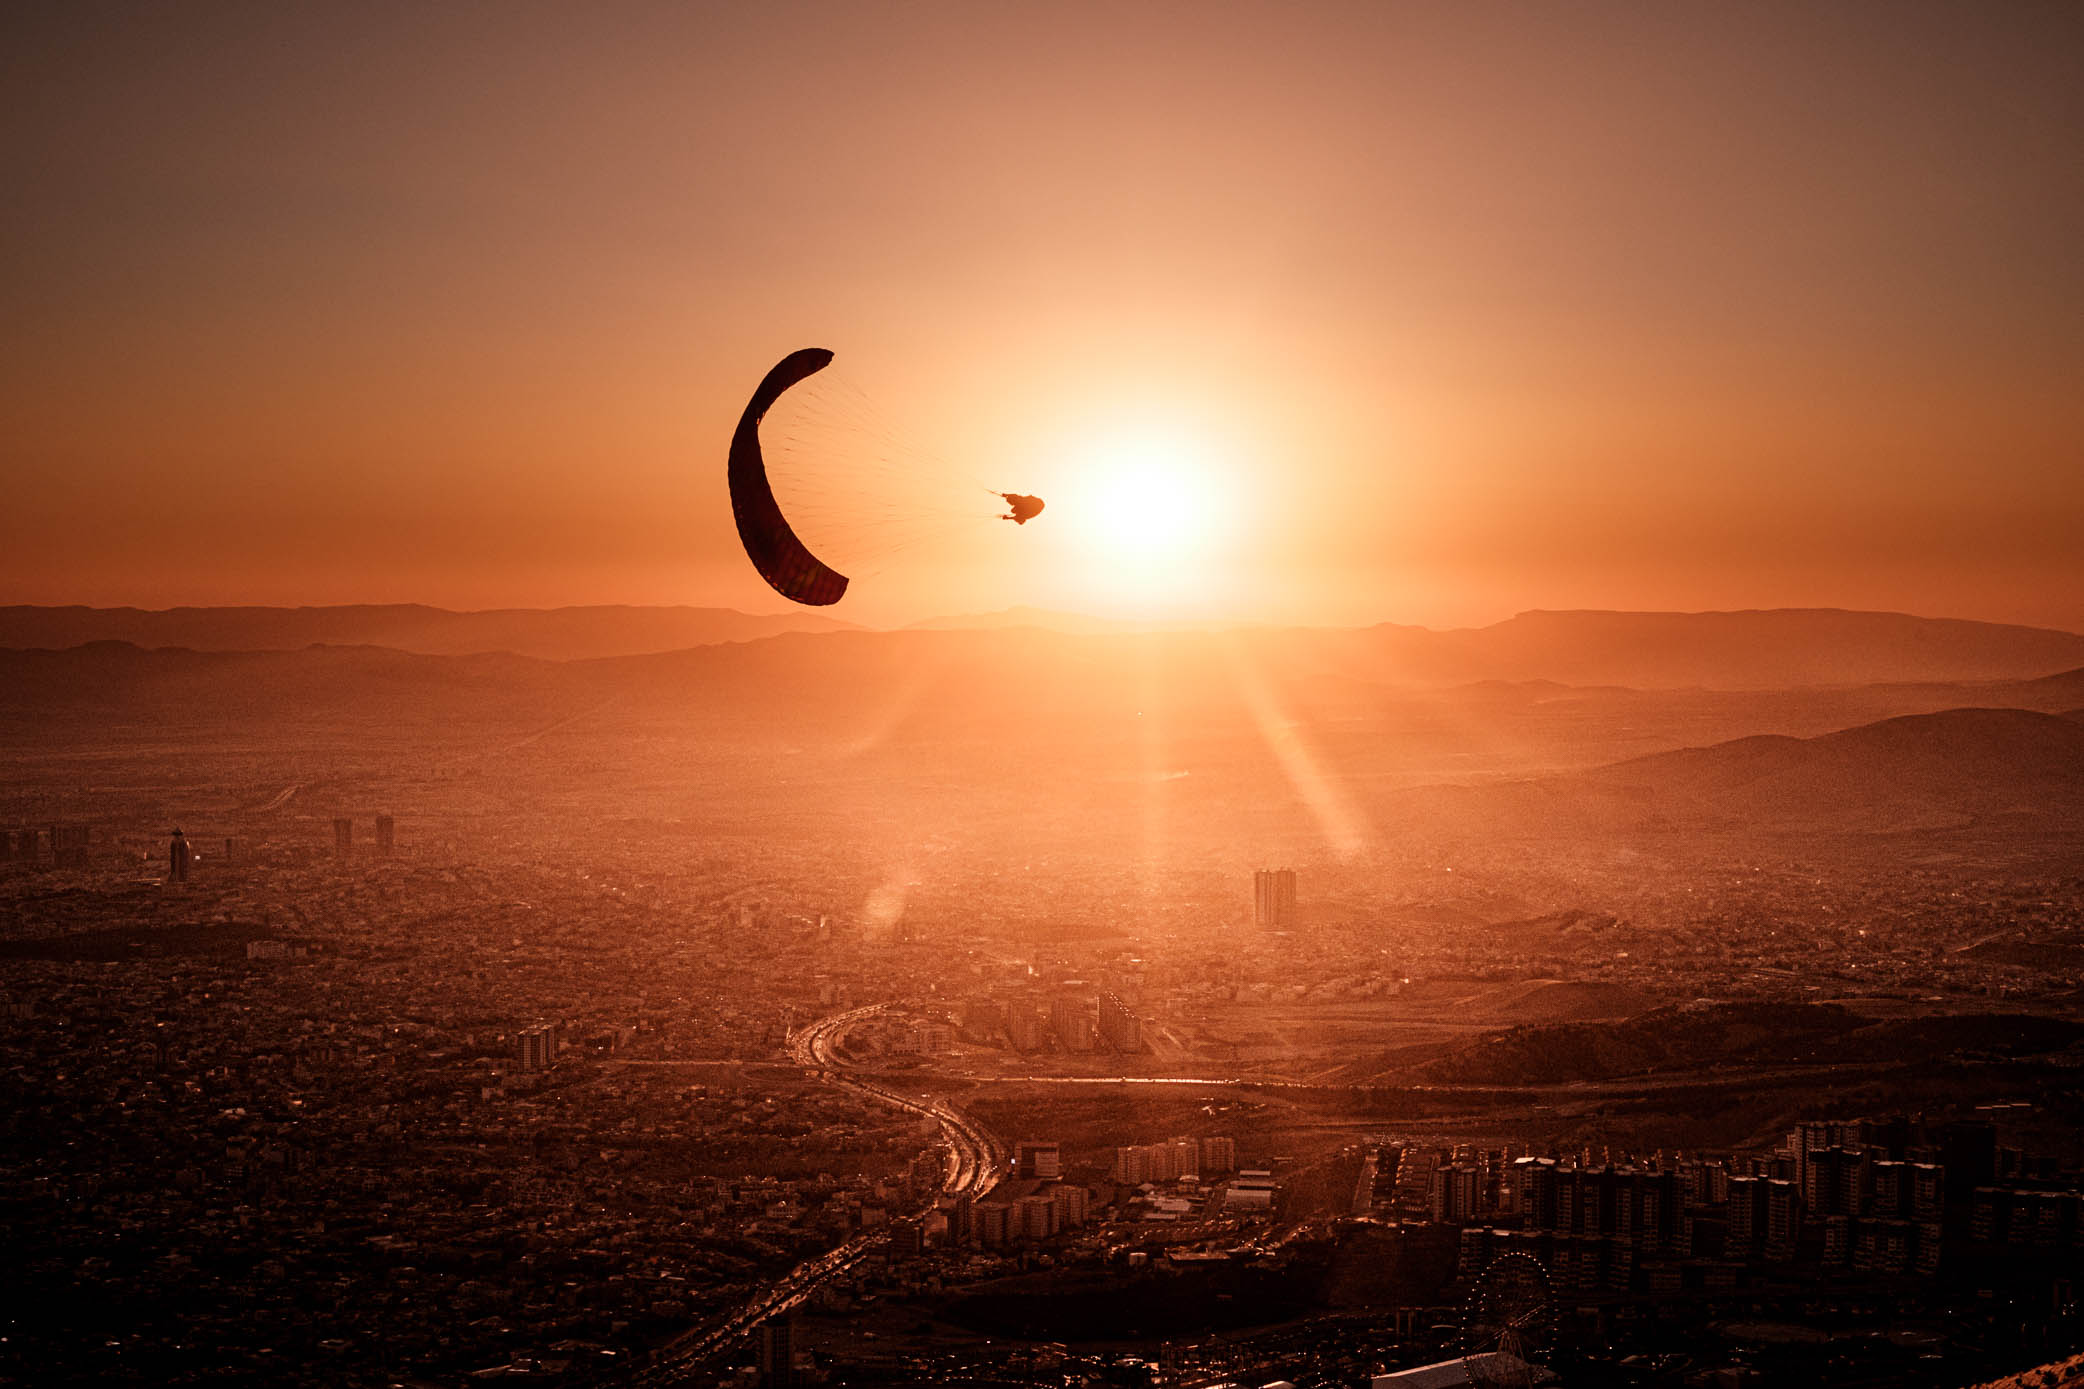 PARAGLIDING OVER THE SKIES